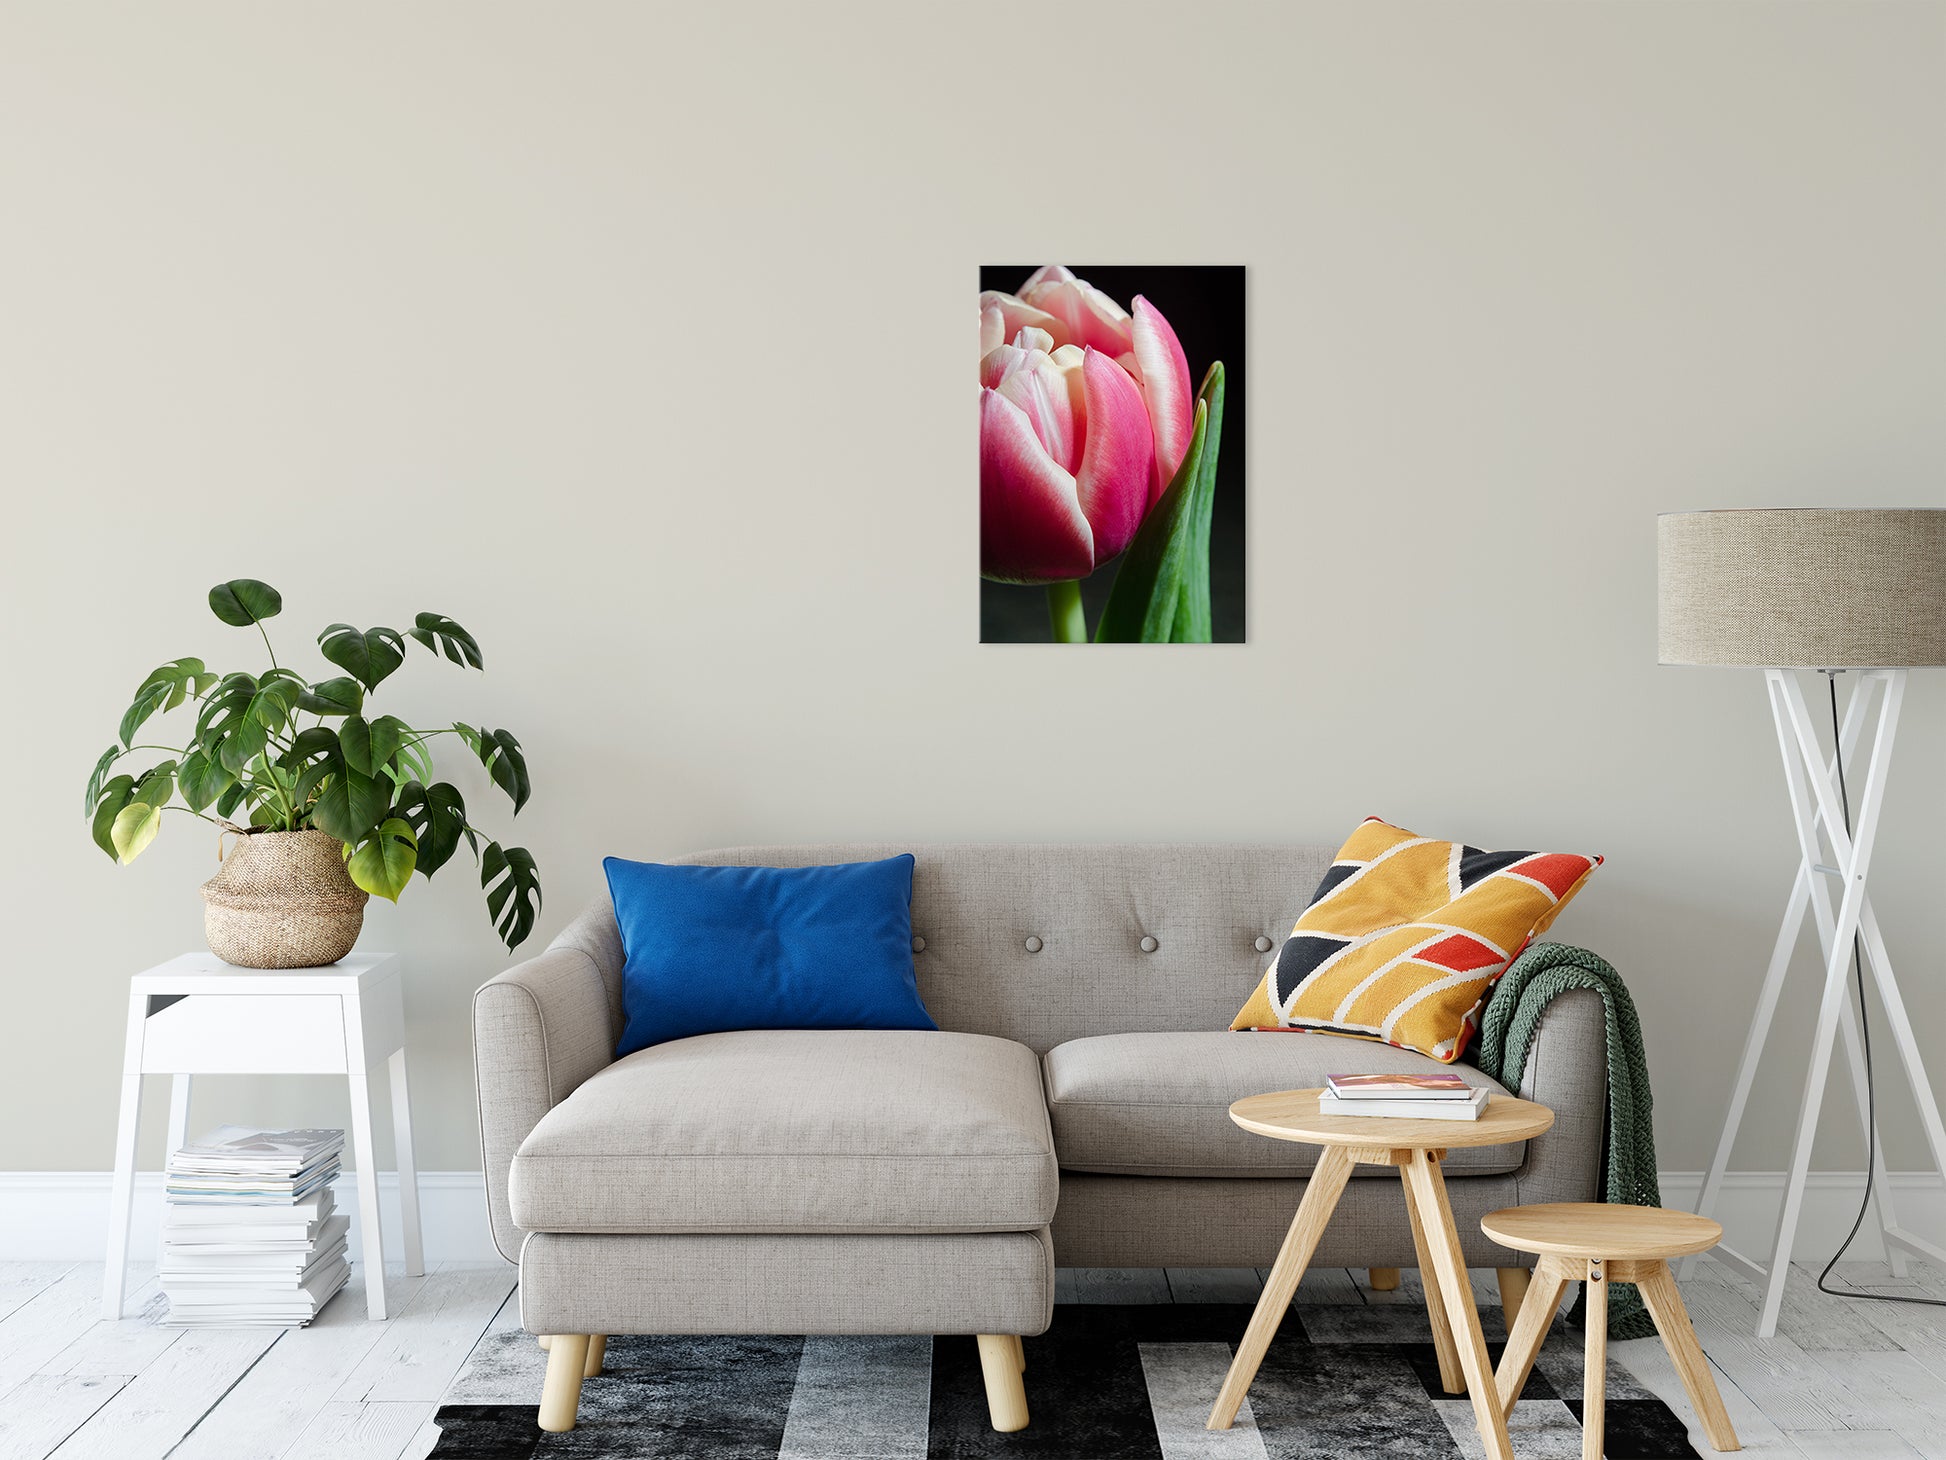 Pink and White Tulip Nature / Floral Photo Fine Art Canvas Wall Art Prints 20" x 24" - PIPAFINEART